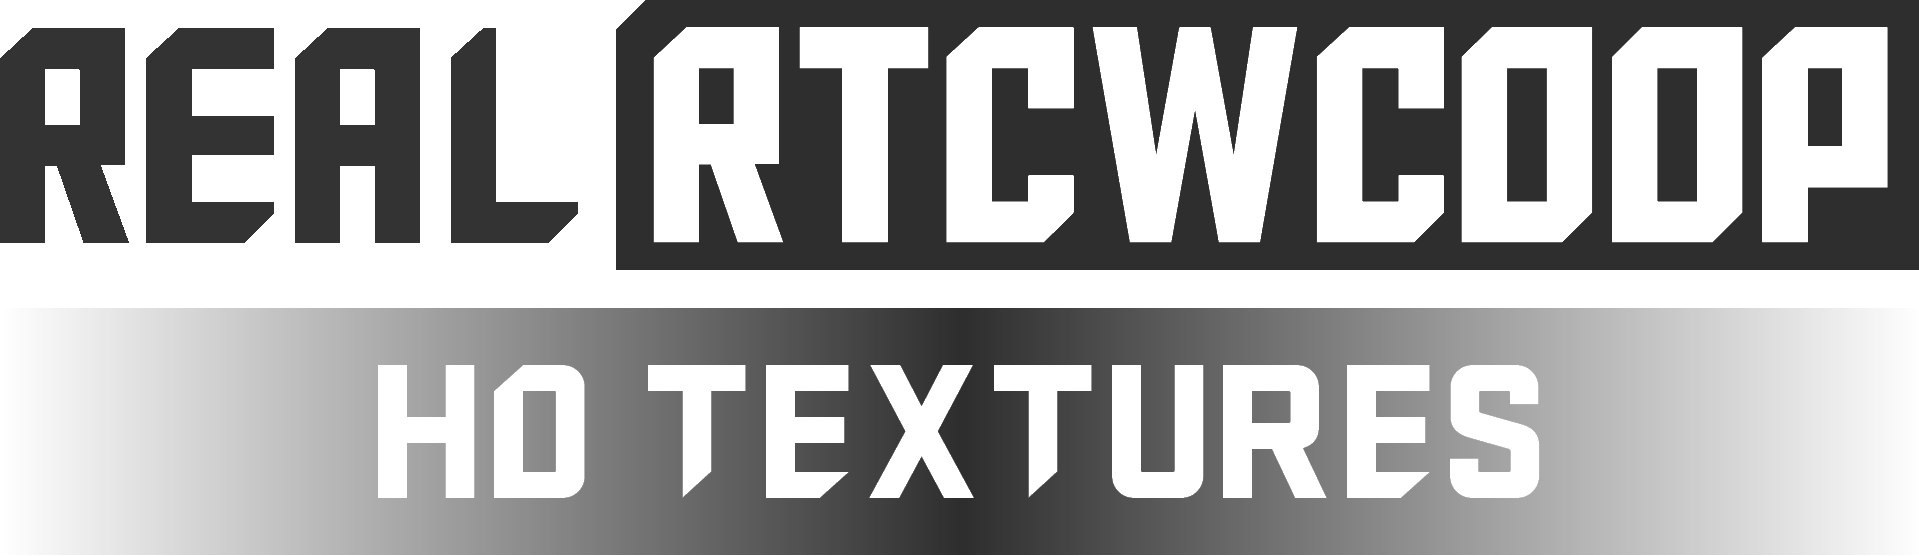 how to install rtcw mods